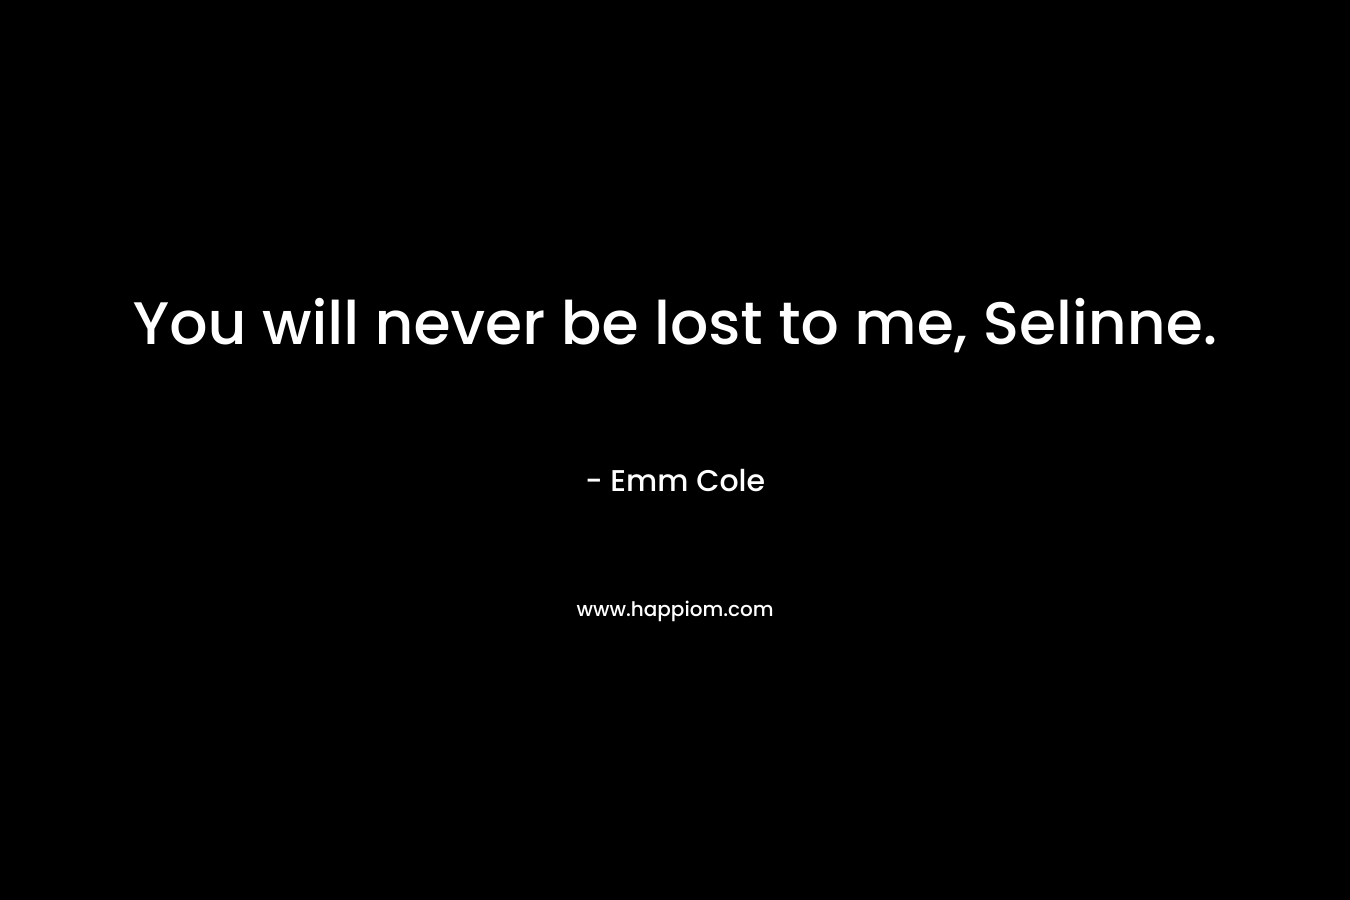 You will never be lost to me, Selinne. – Emm Cole